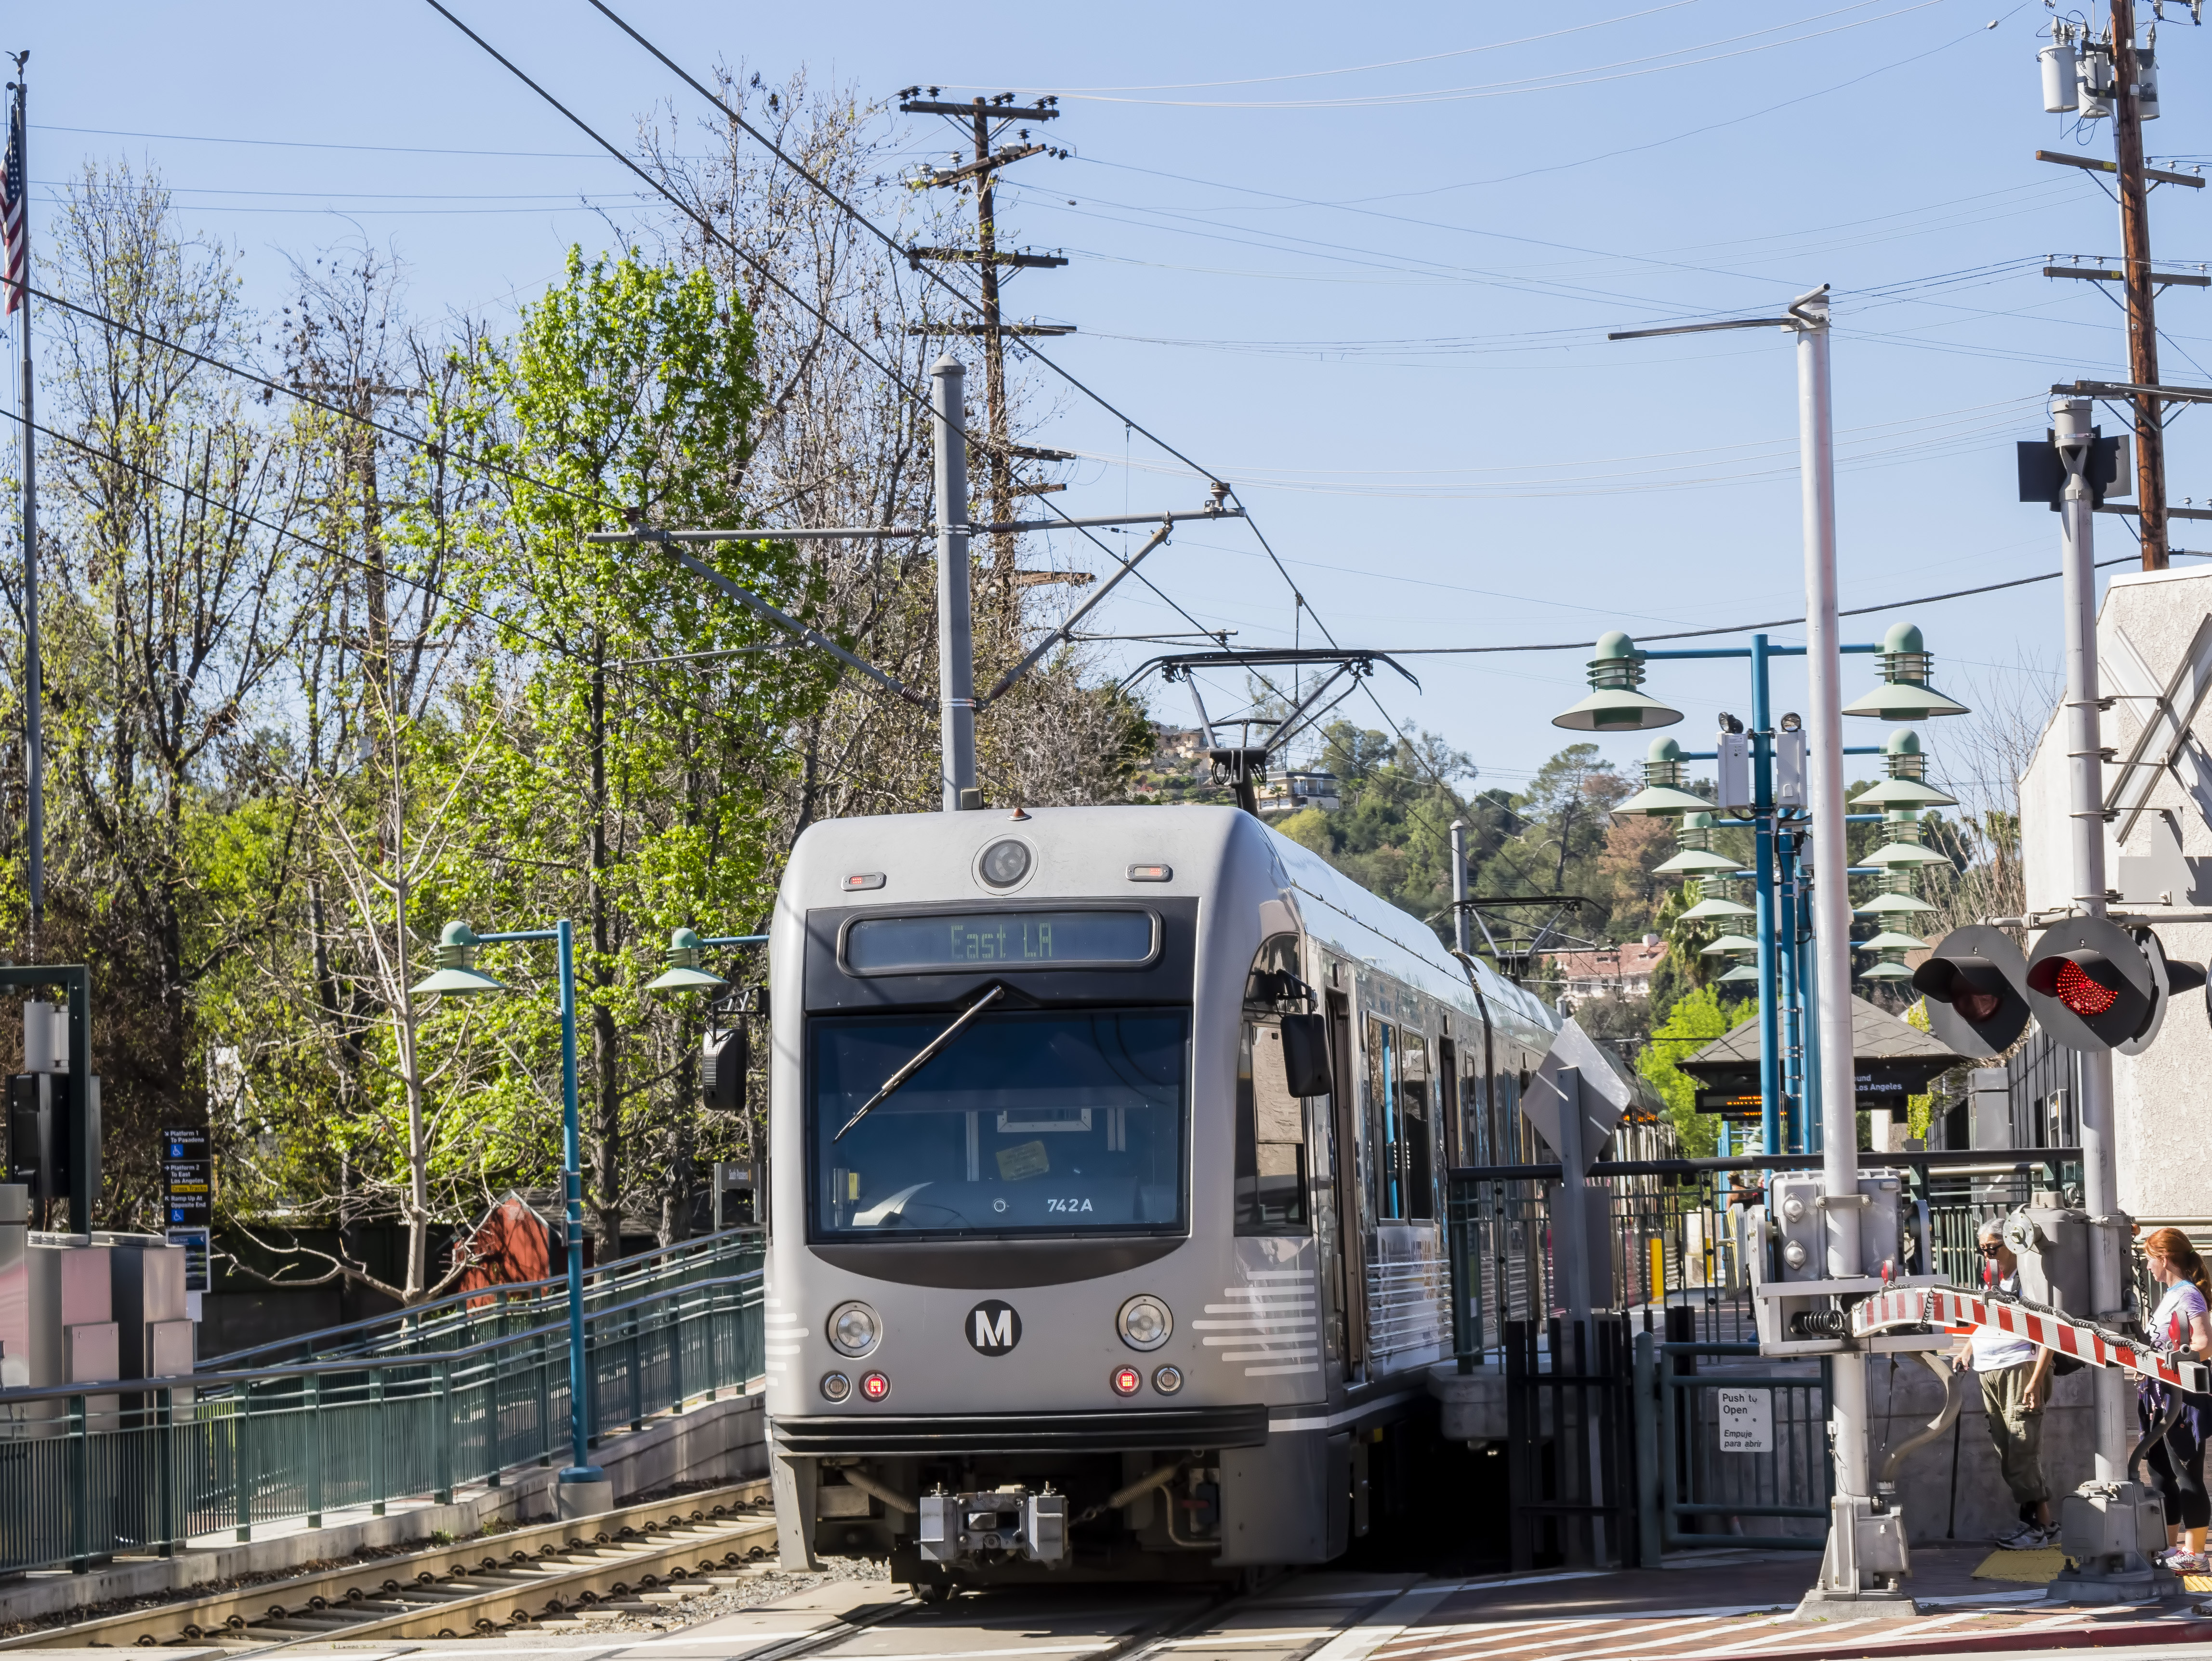 A Gold Line train stopped at a station in South Pasadena.